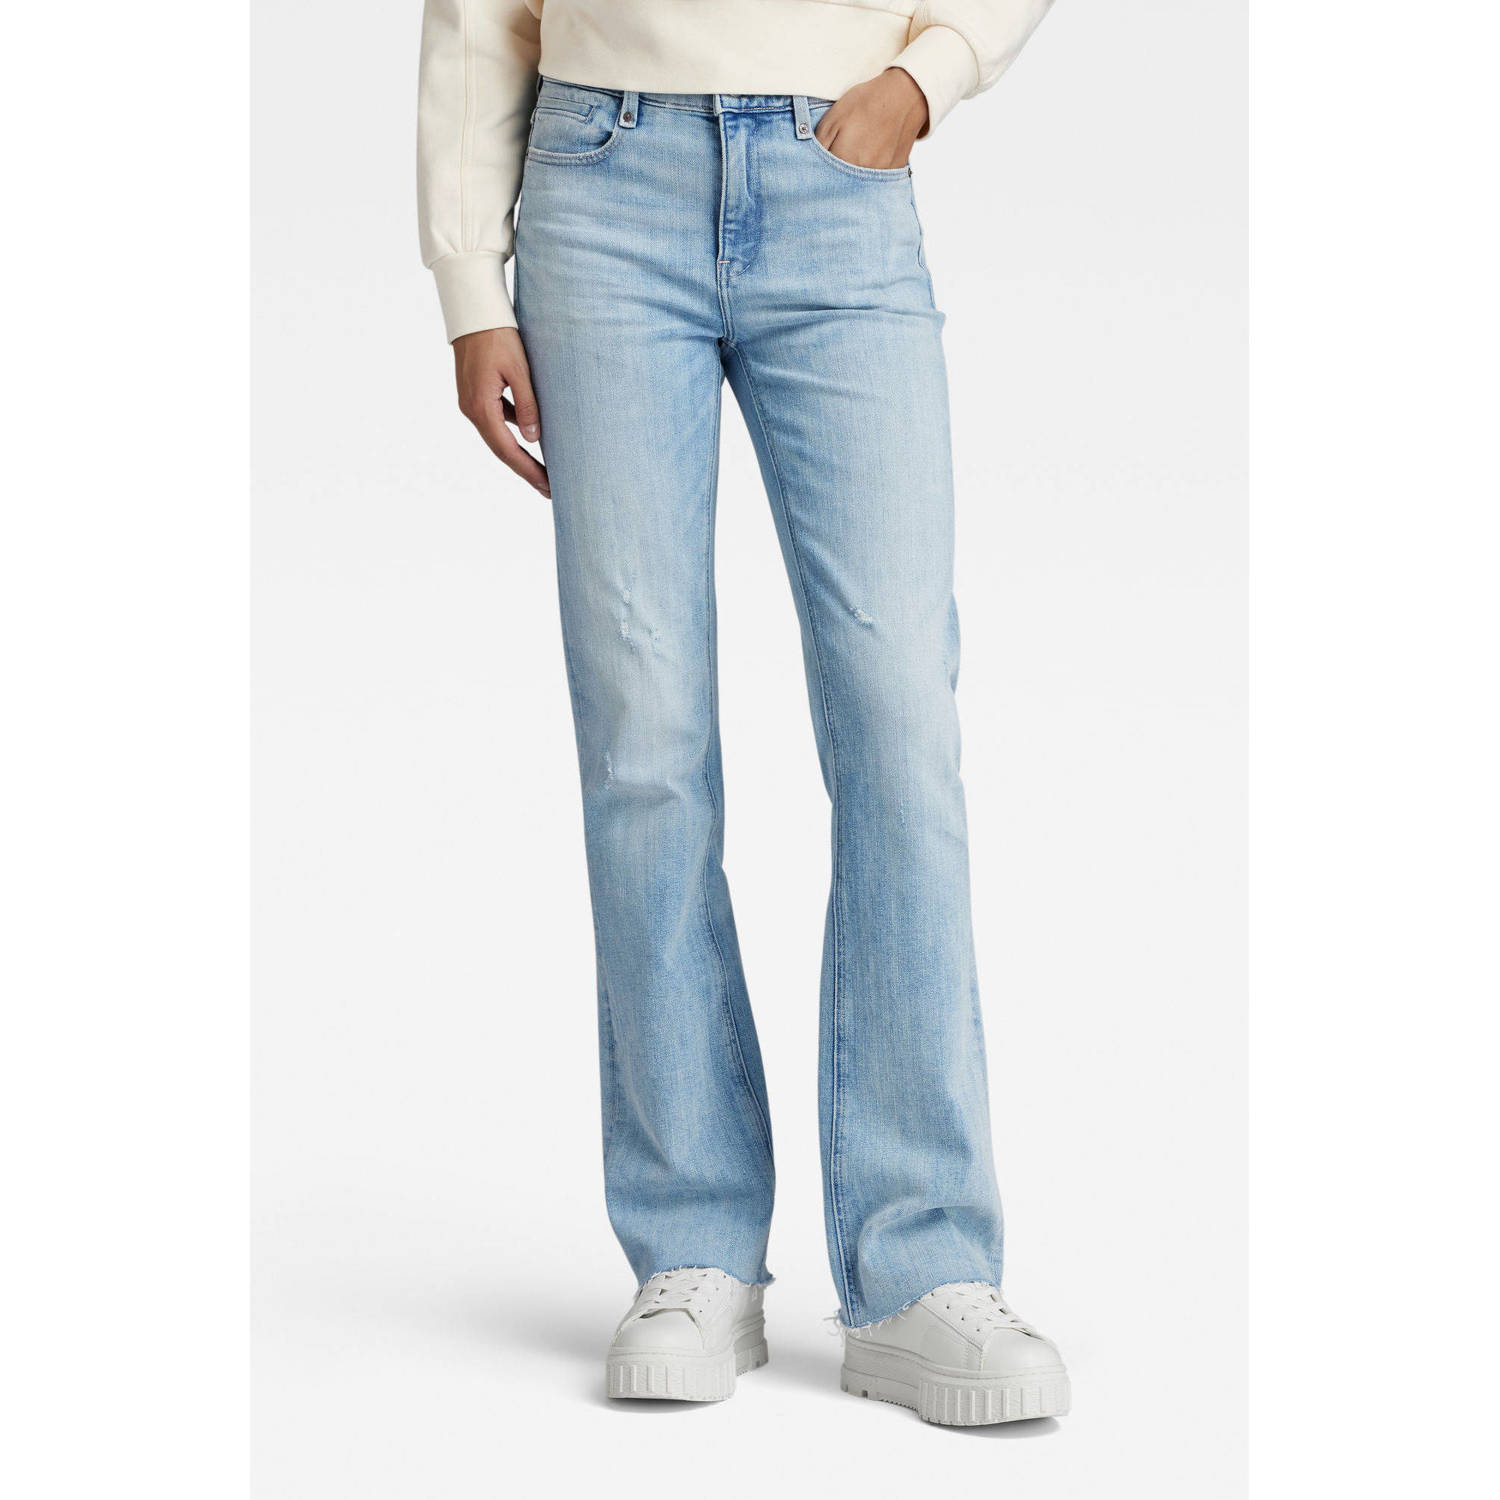 G-Star RAW Noxer bootcut jeans sun faded mirage blue